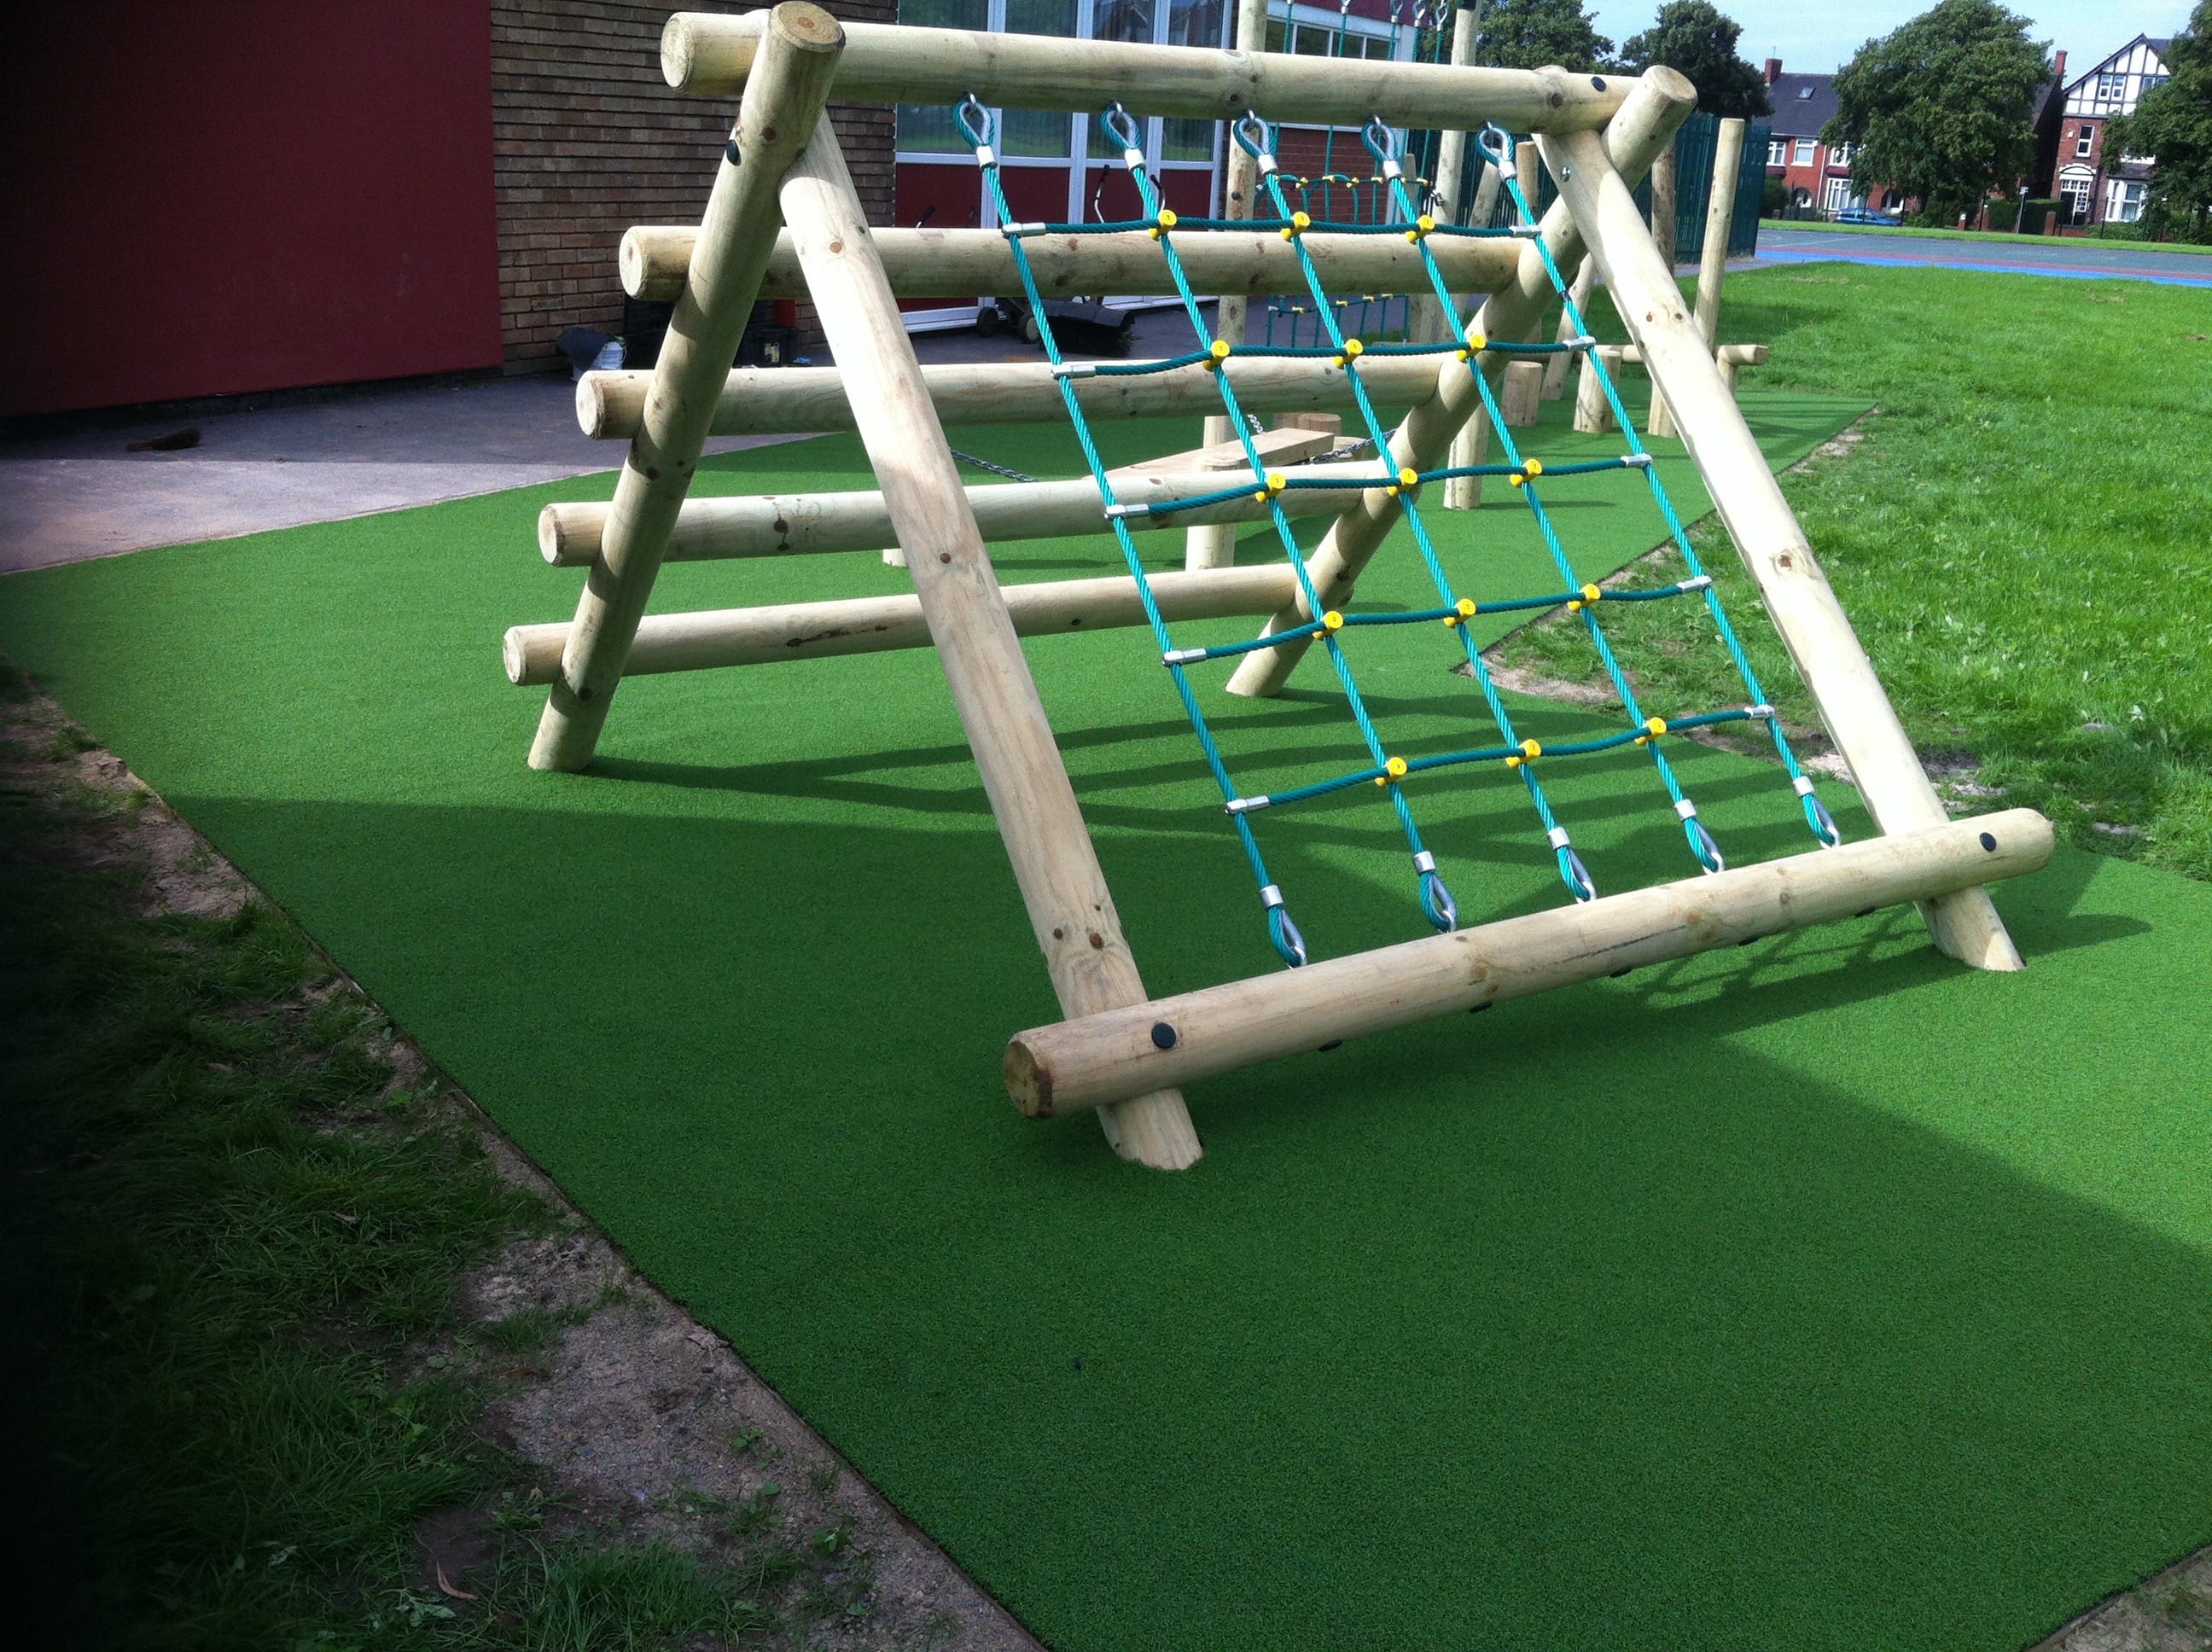 wooden playground equipment with green safety surfacing